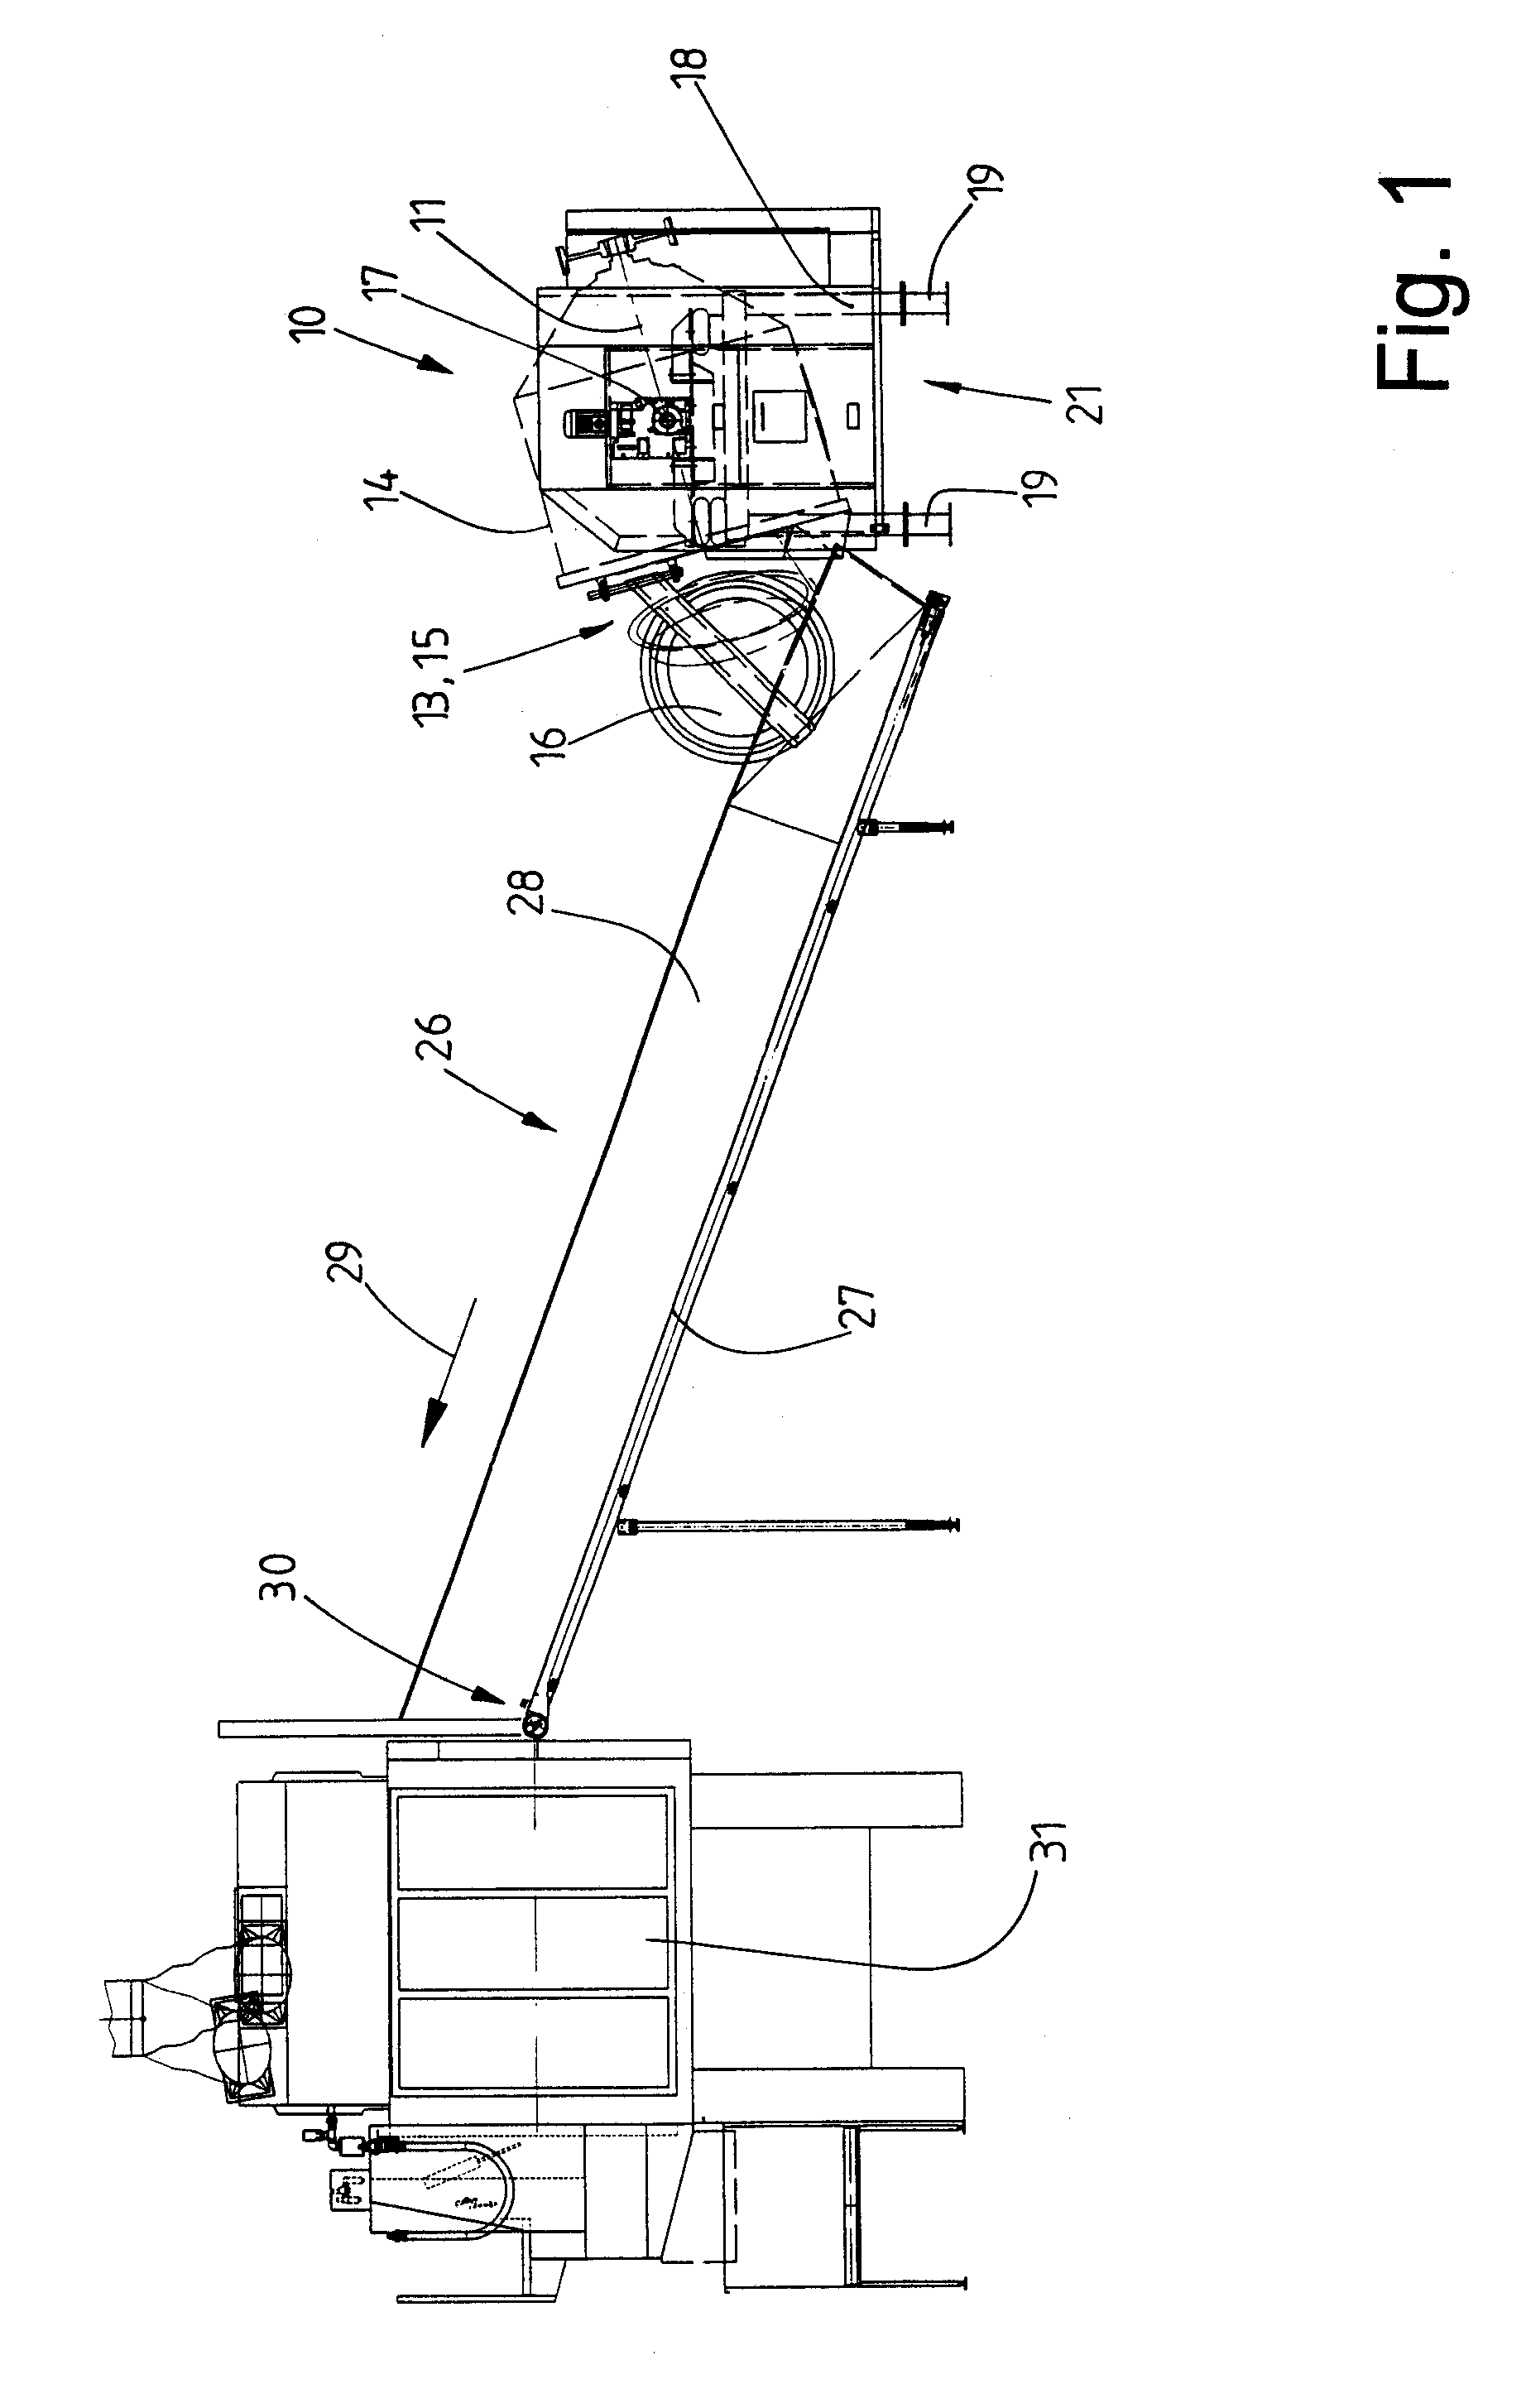 Method and apparatus for washing and/or spin-drying laundry